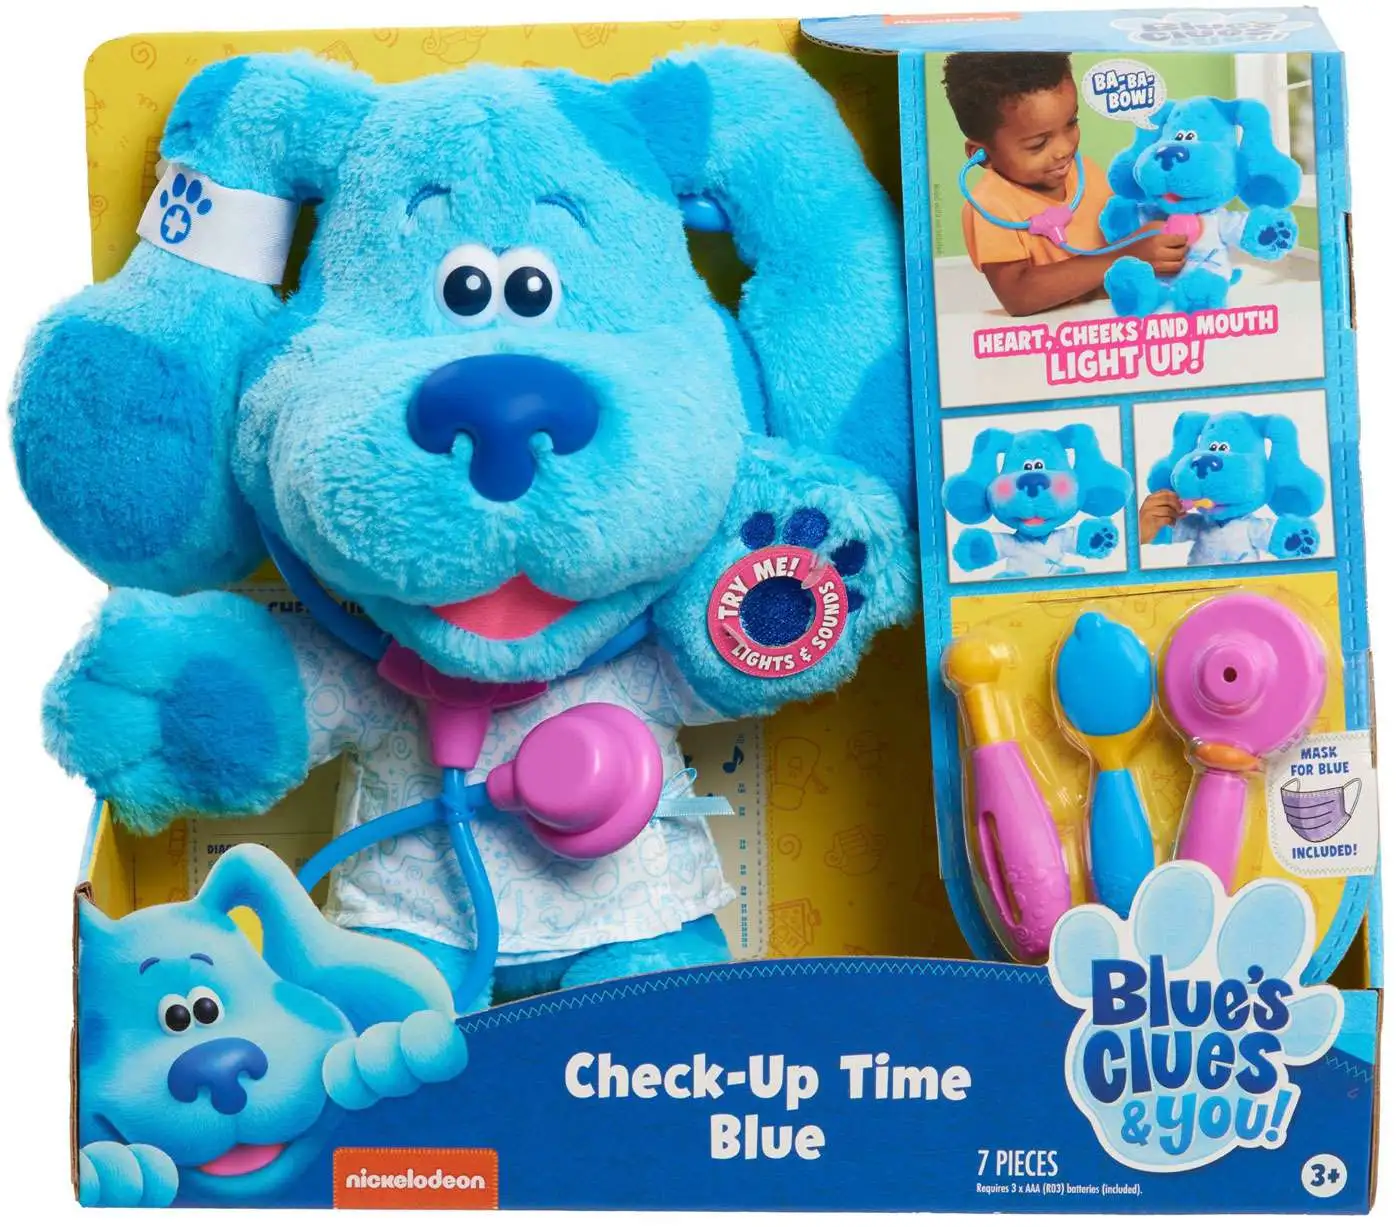 New Blues Clues Deluxe Water Squirter Set Bath Toy by Just Play